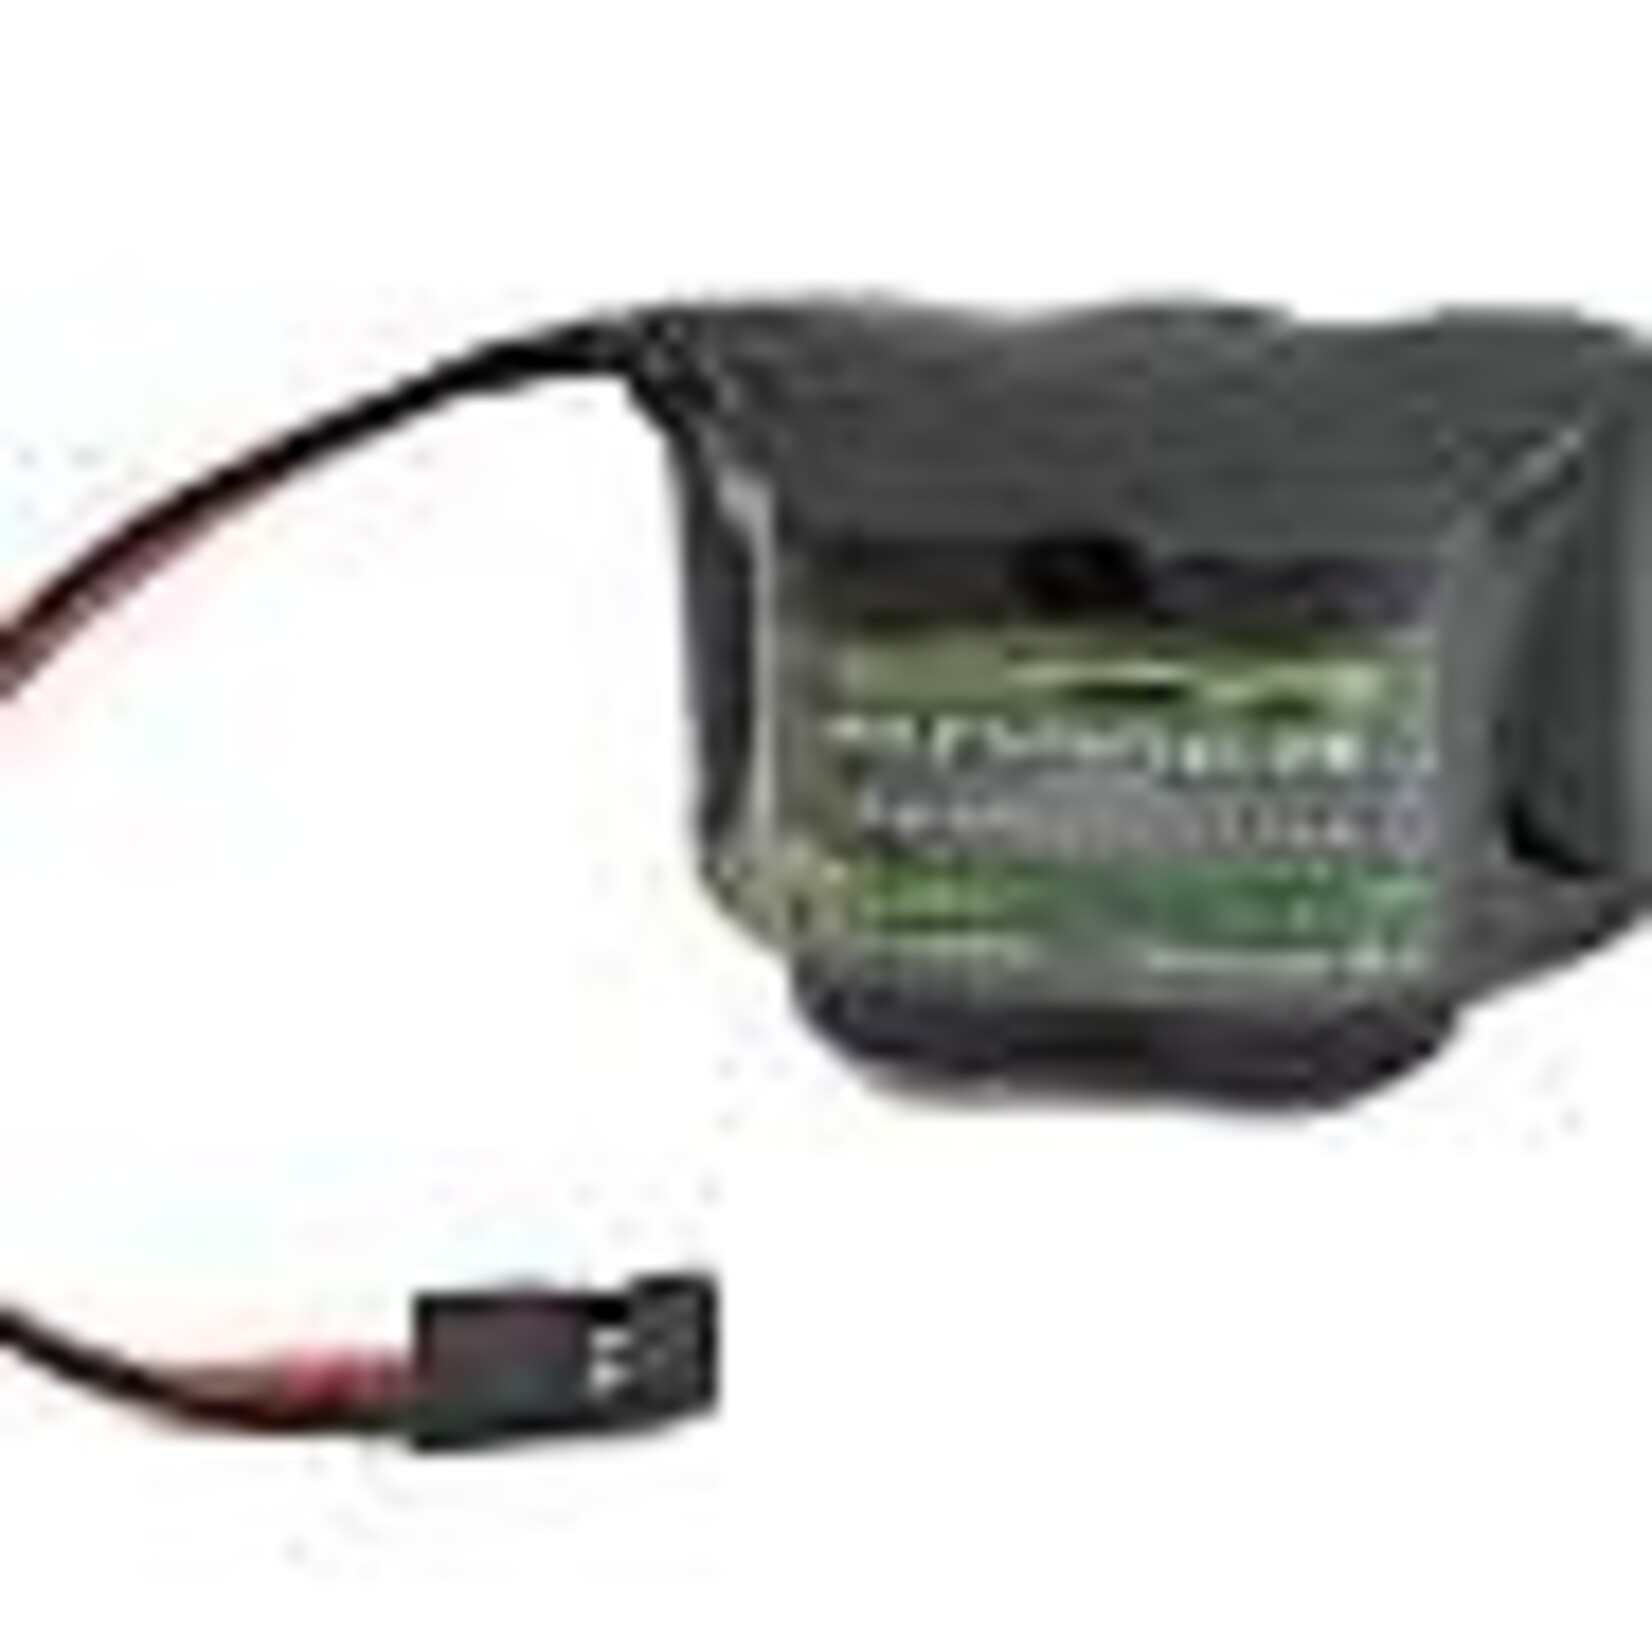 EcoPower ECP-5008 EcoPower 5-Cell NiMH 2/3A Hump Receiver Battery Pack (6.0V/1600mAh)